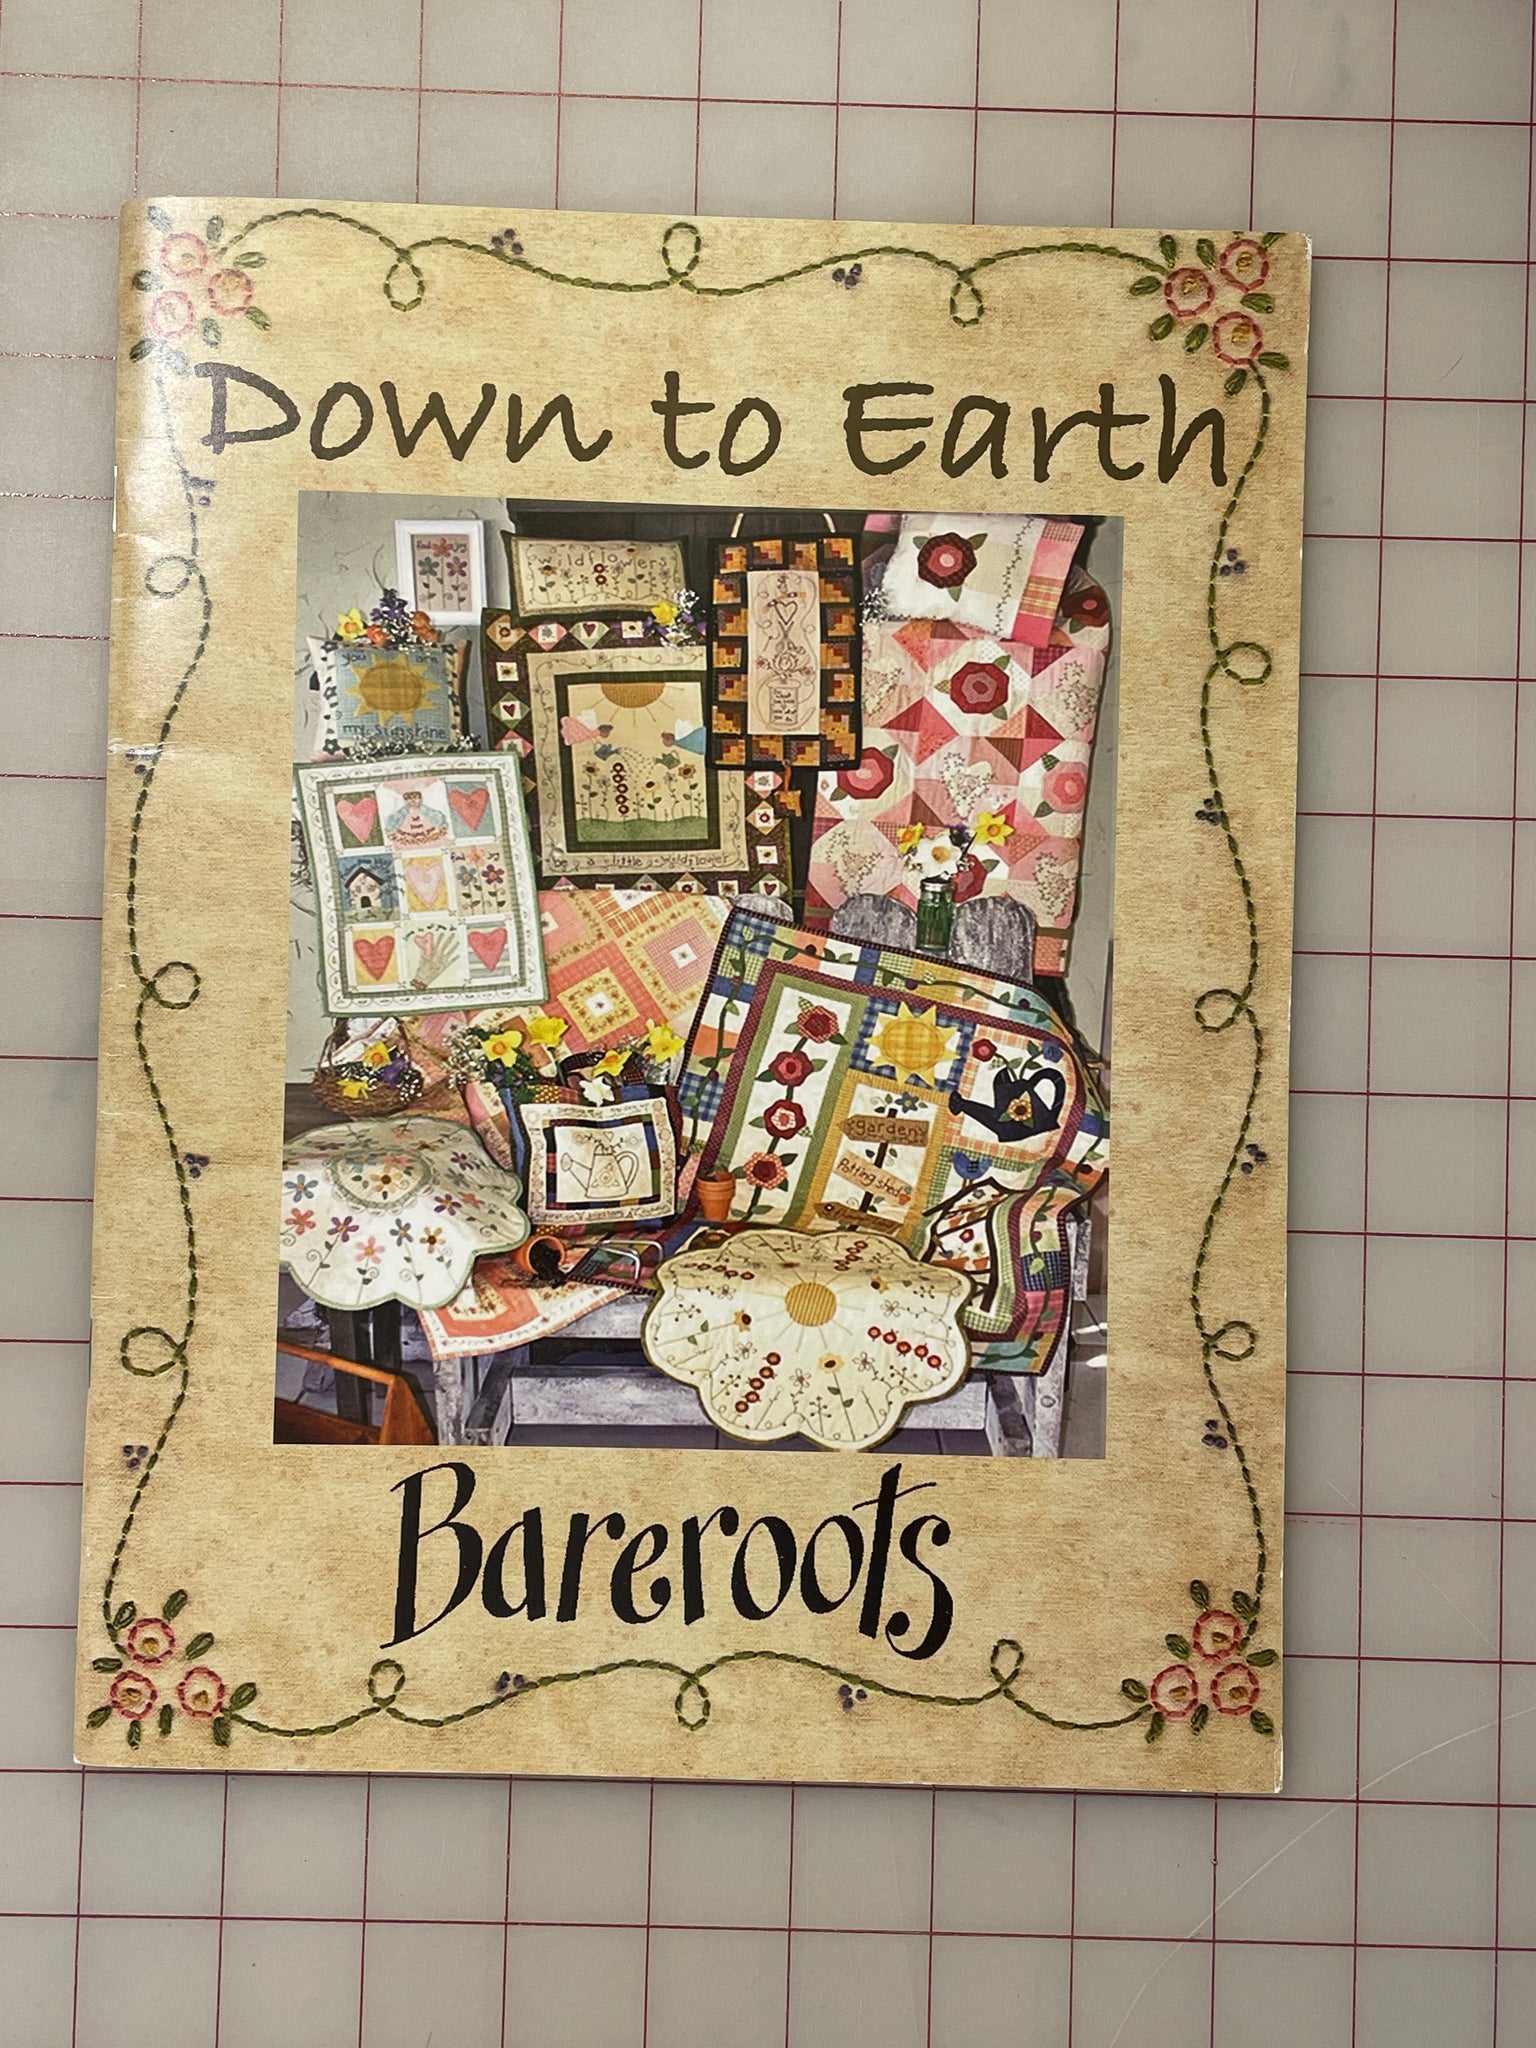 SALE 2006 Quilting Book - "Down to Earth"